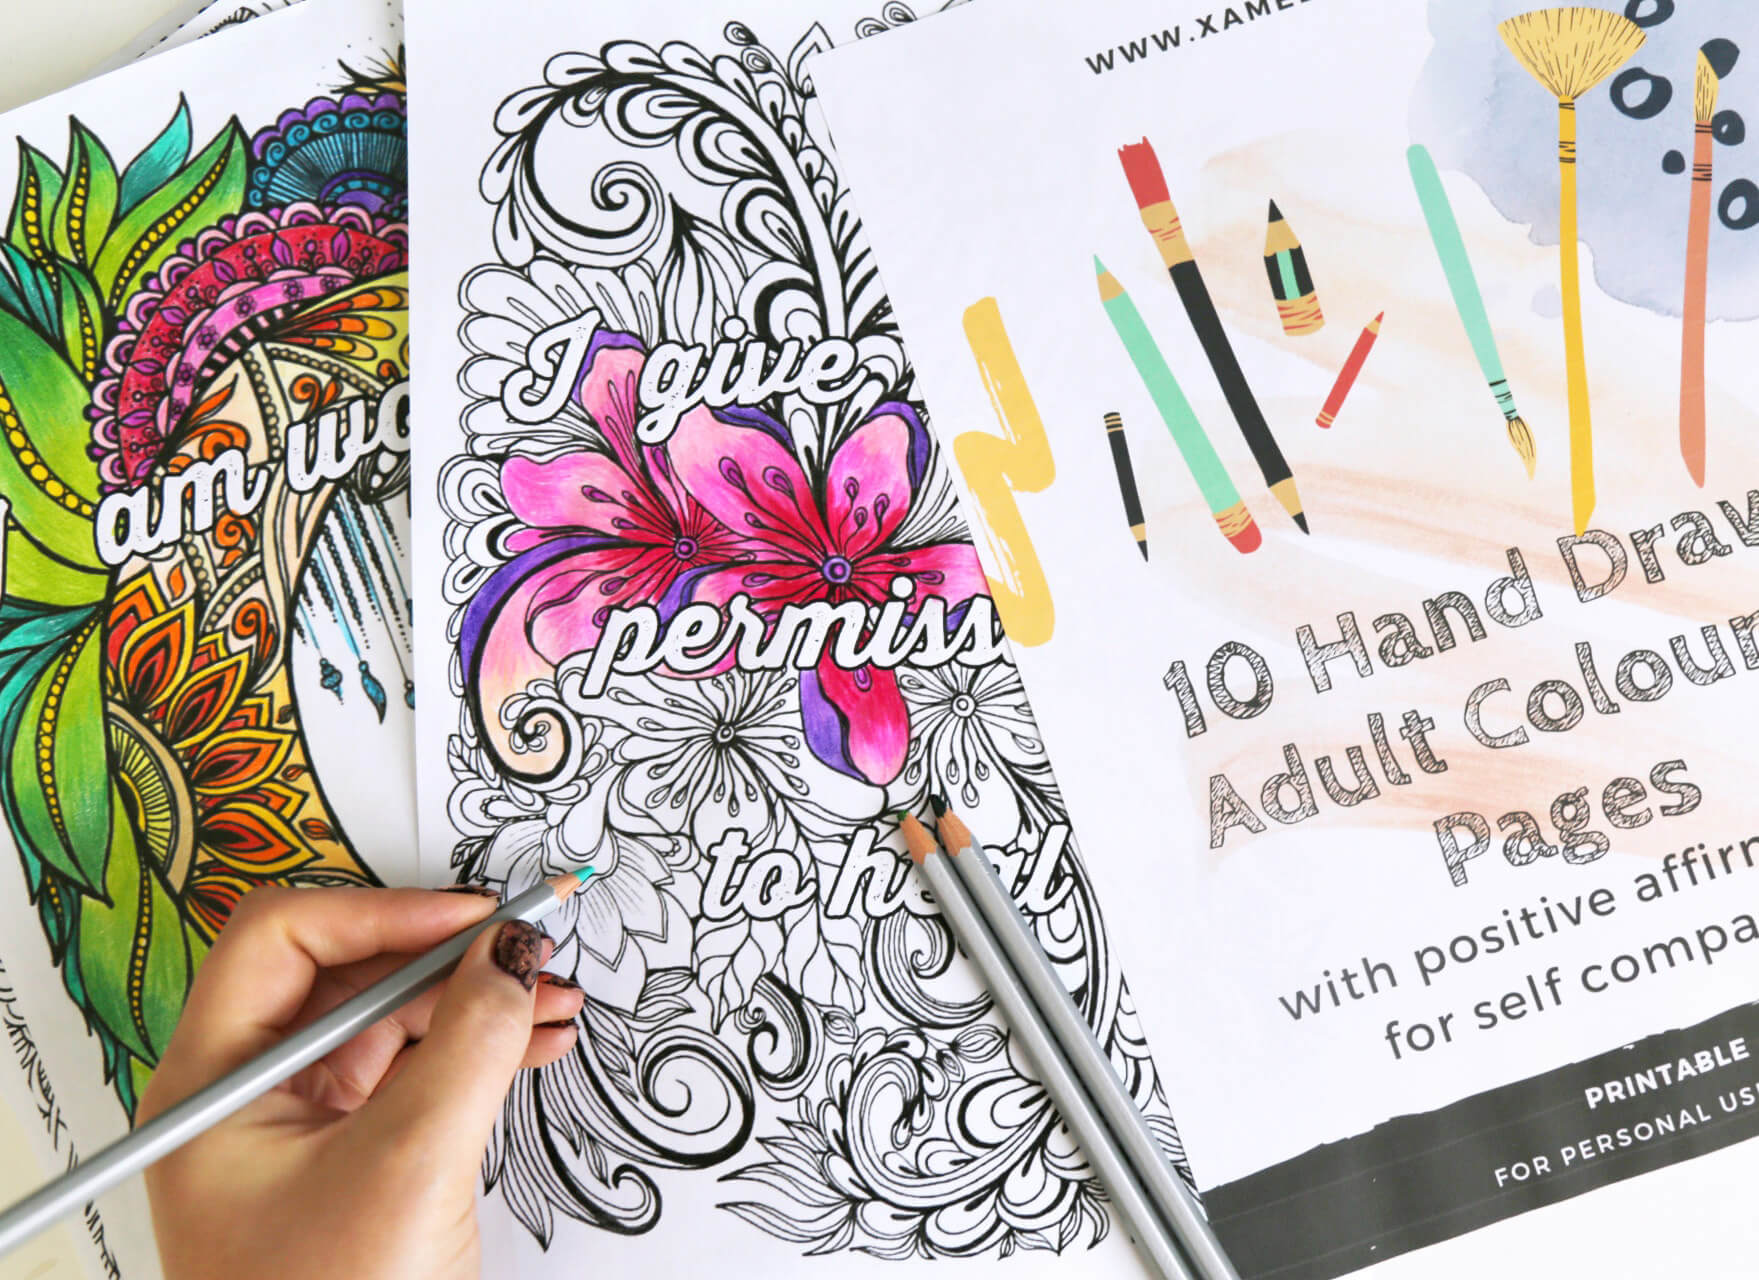 Hand drawn adult colouring pages with positive affirmations for self passion project